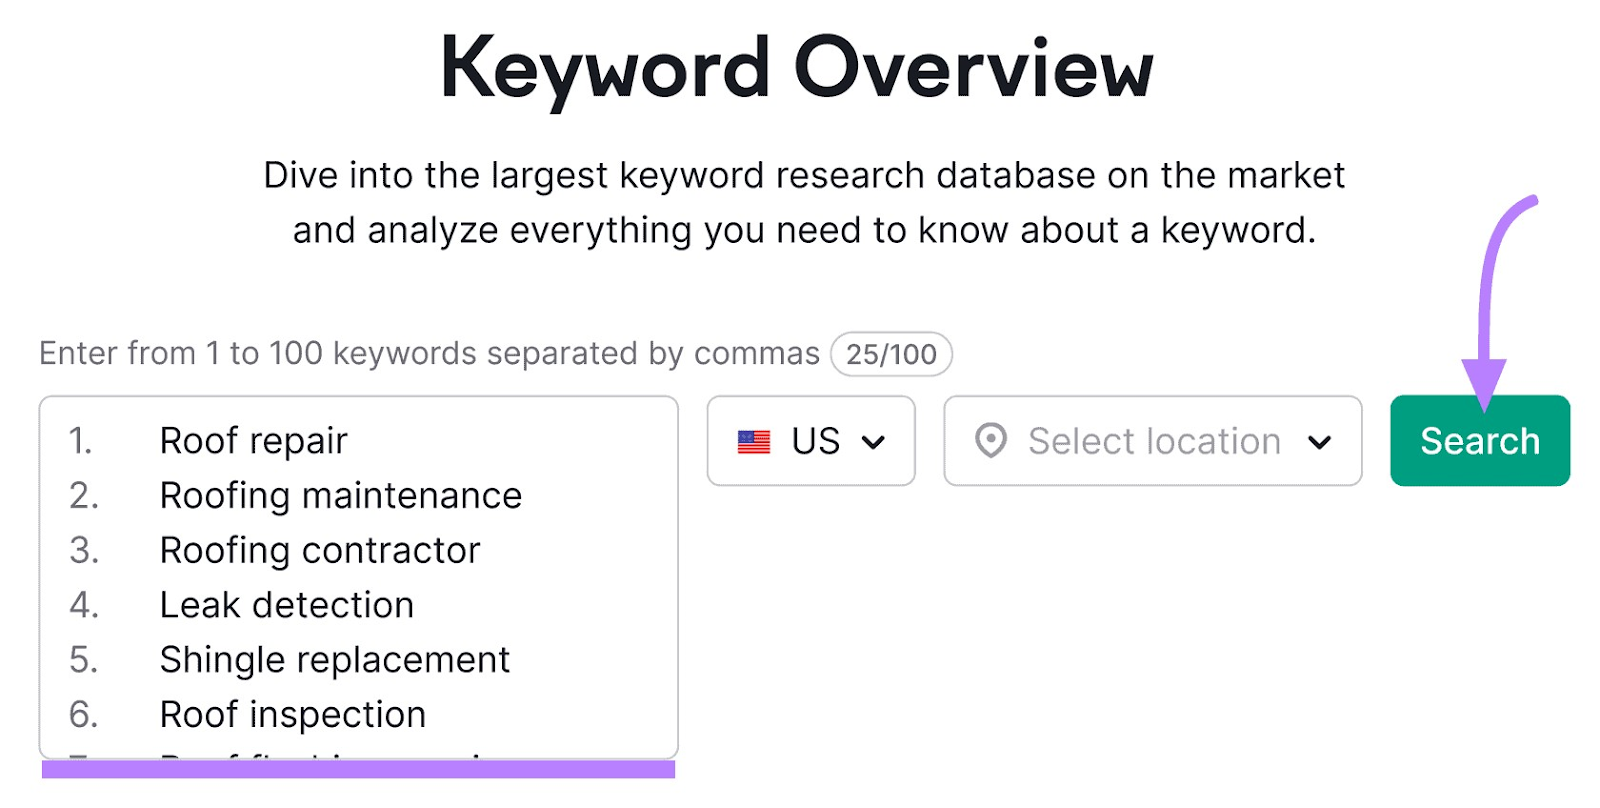 Keyword Overview tool search bar